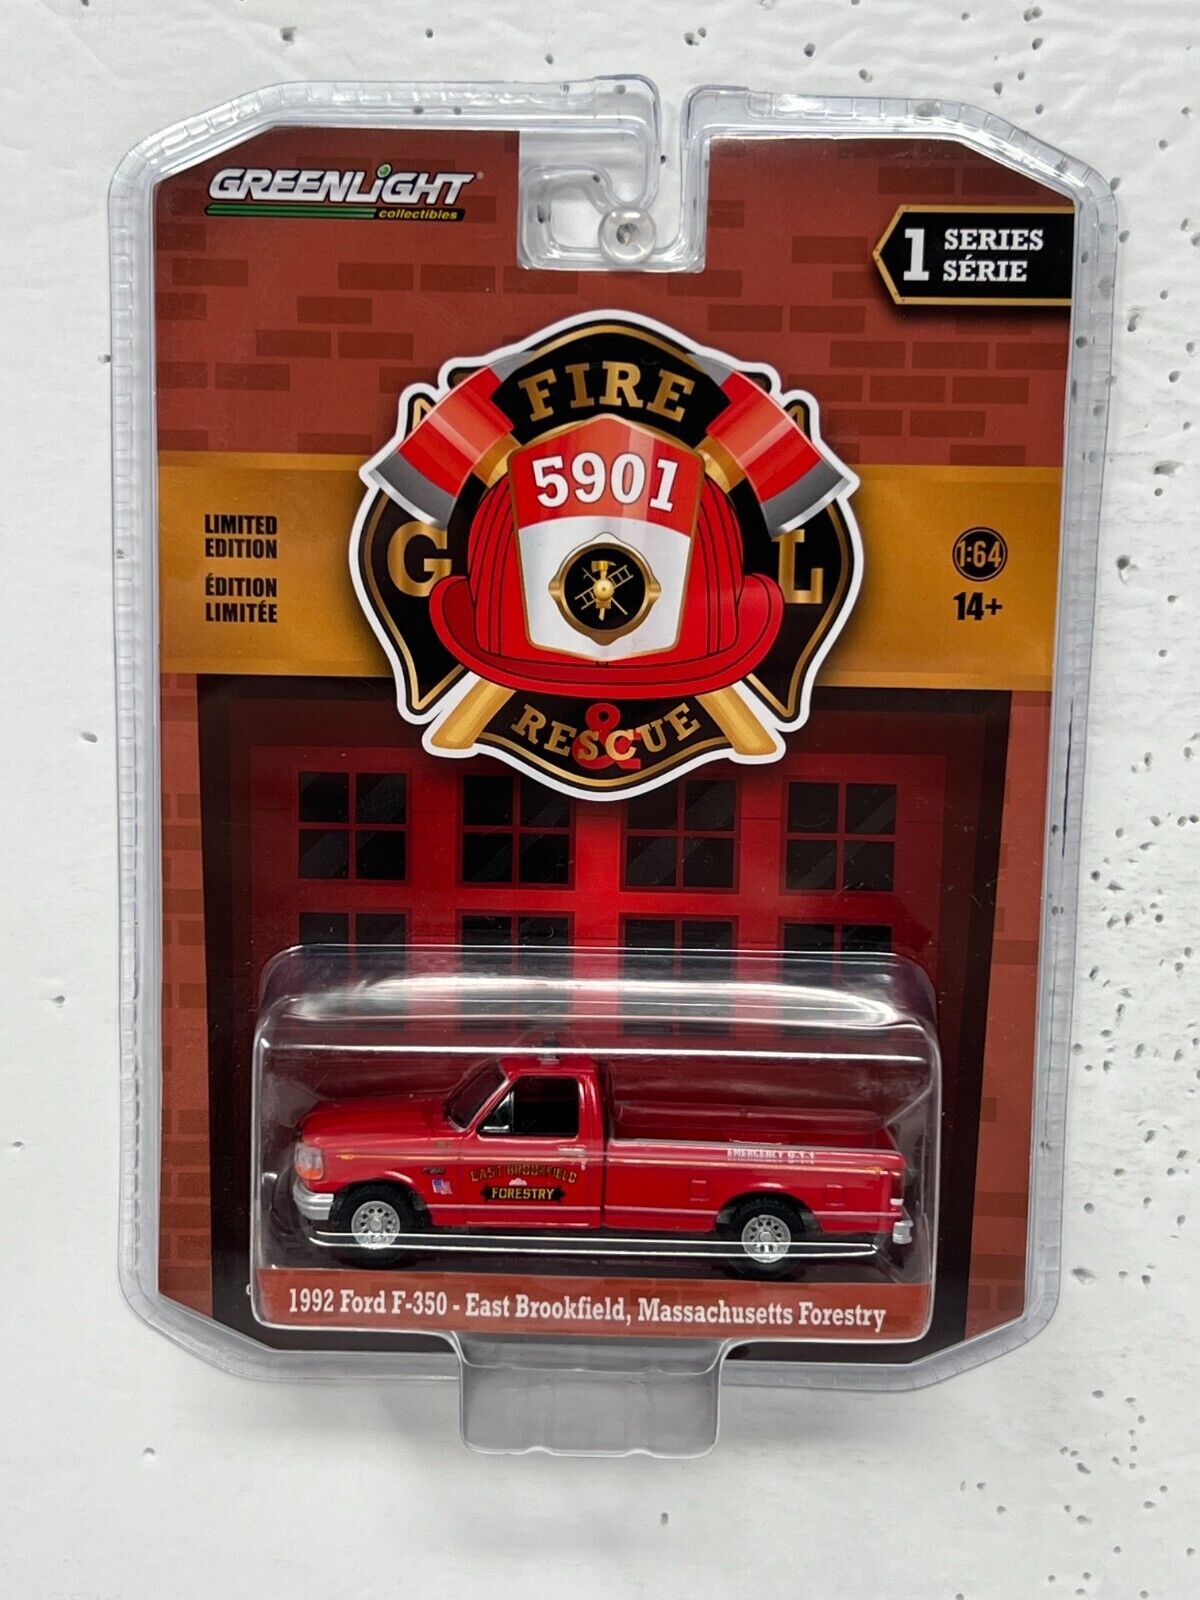 Greenlight Fire & Rescue 1992 Ford F-350 1:64 Diecast